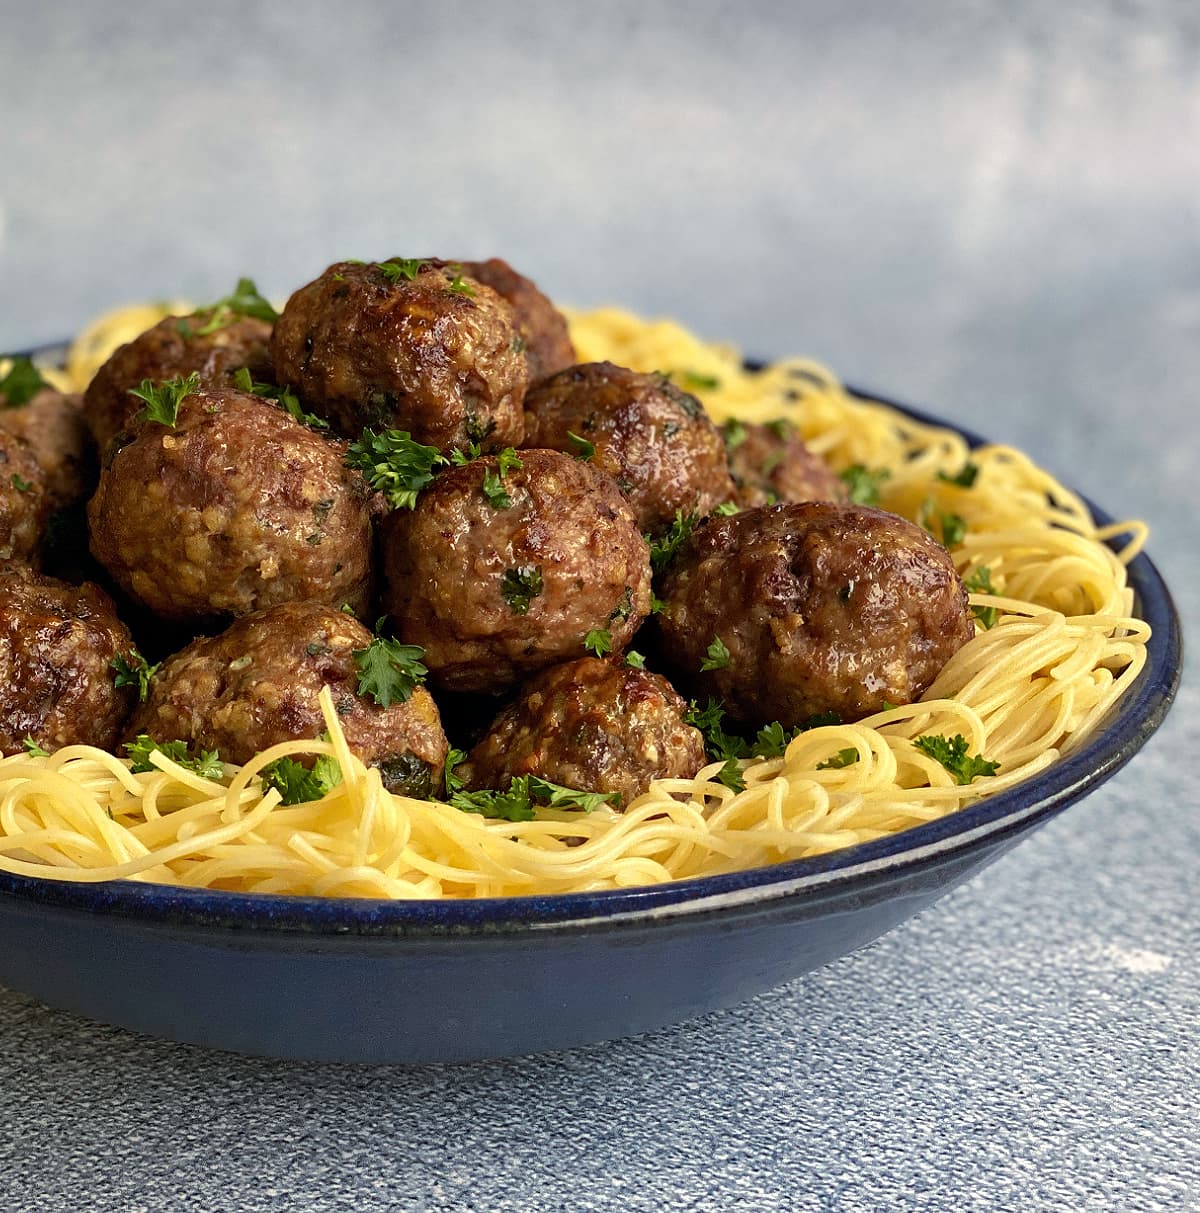 Bowl of cooked spaghetti noodles with a pile of baked ricotta meatballs in the center, garnished with chopped parsley.